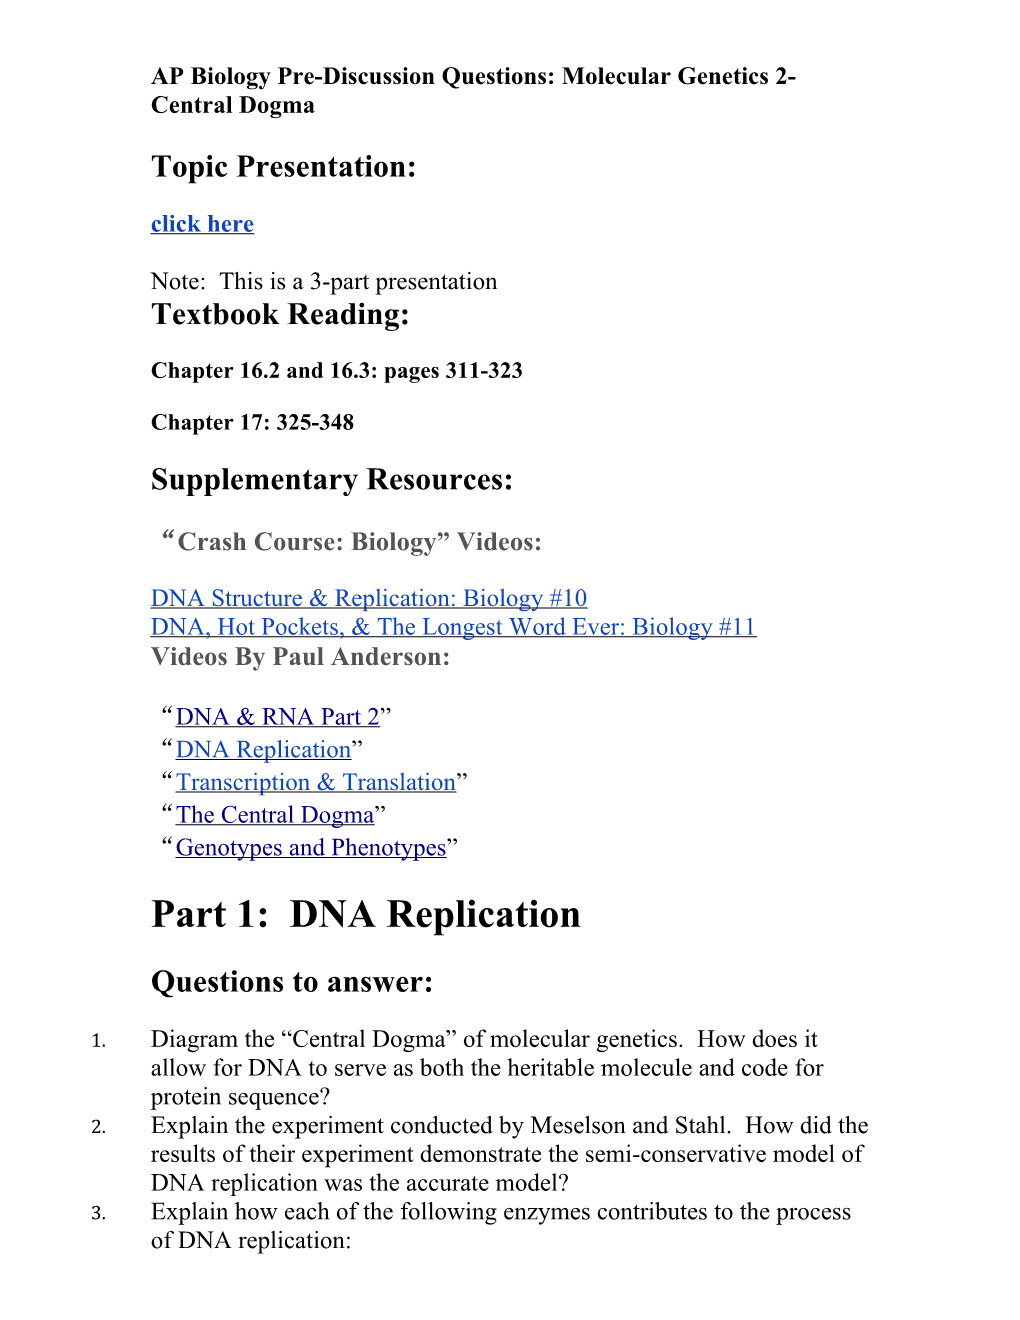 AP Biology Pre-Discussion Questions: Molecular Genetics 2- Central Dogma